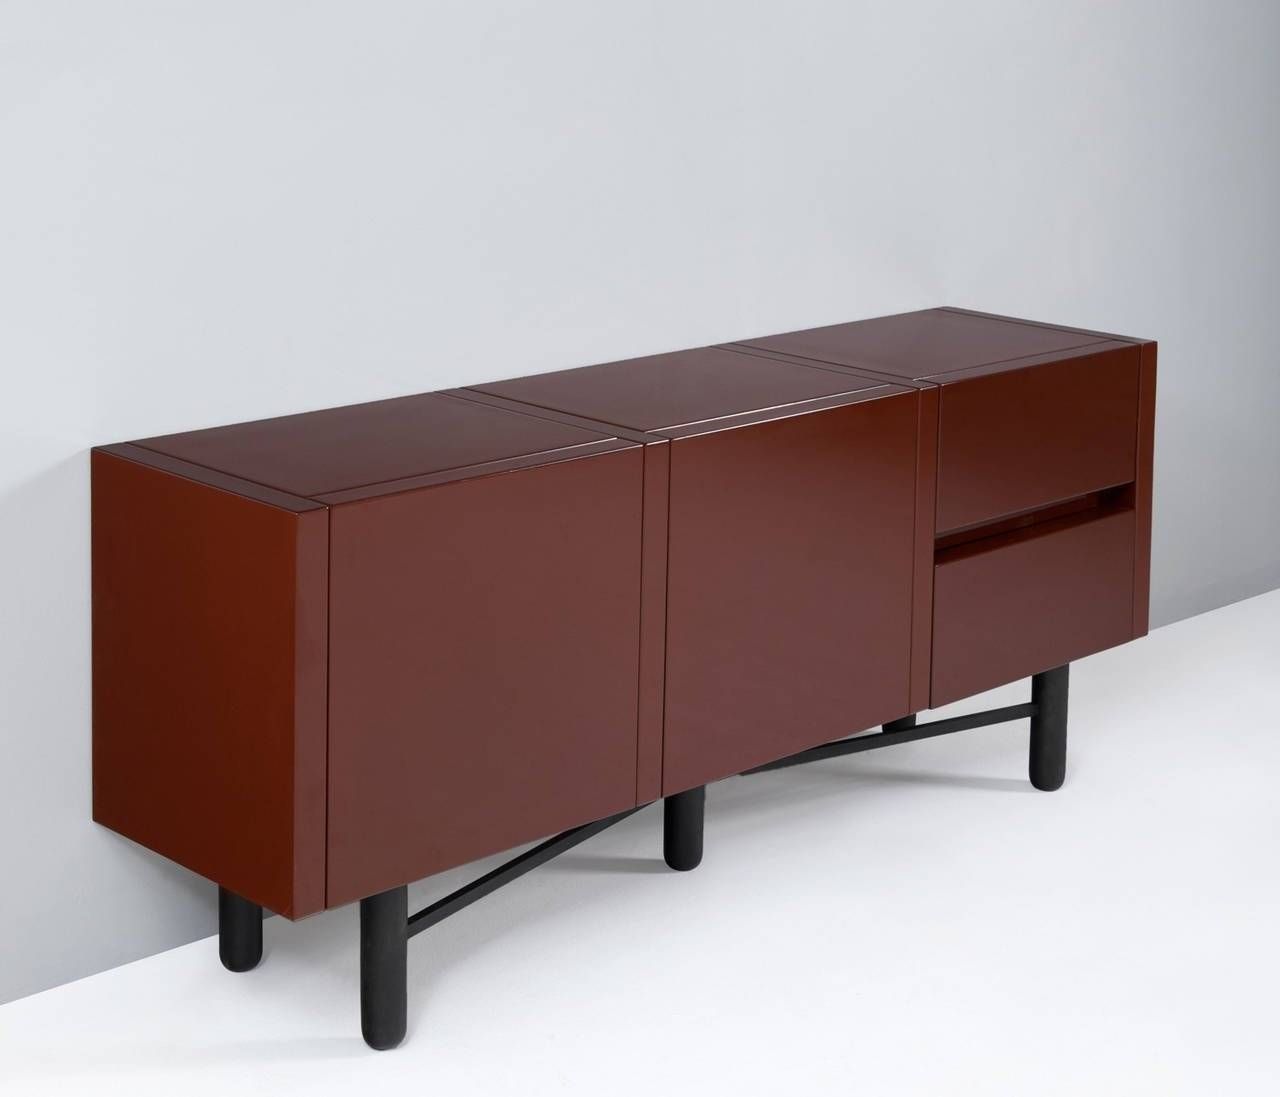 Roche Bobois Red Lacquered High Gloss Sideboard For Sale At 1stdibs With Regard To Grey Gloss Sideboards (View 11 of 15)